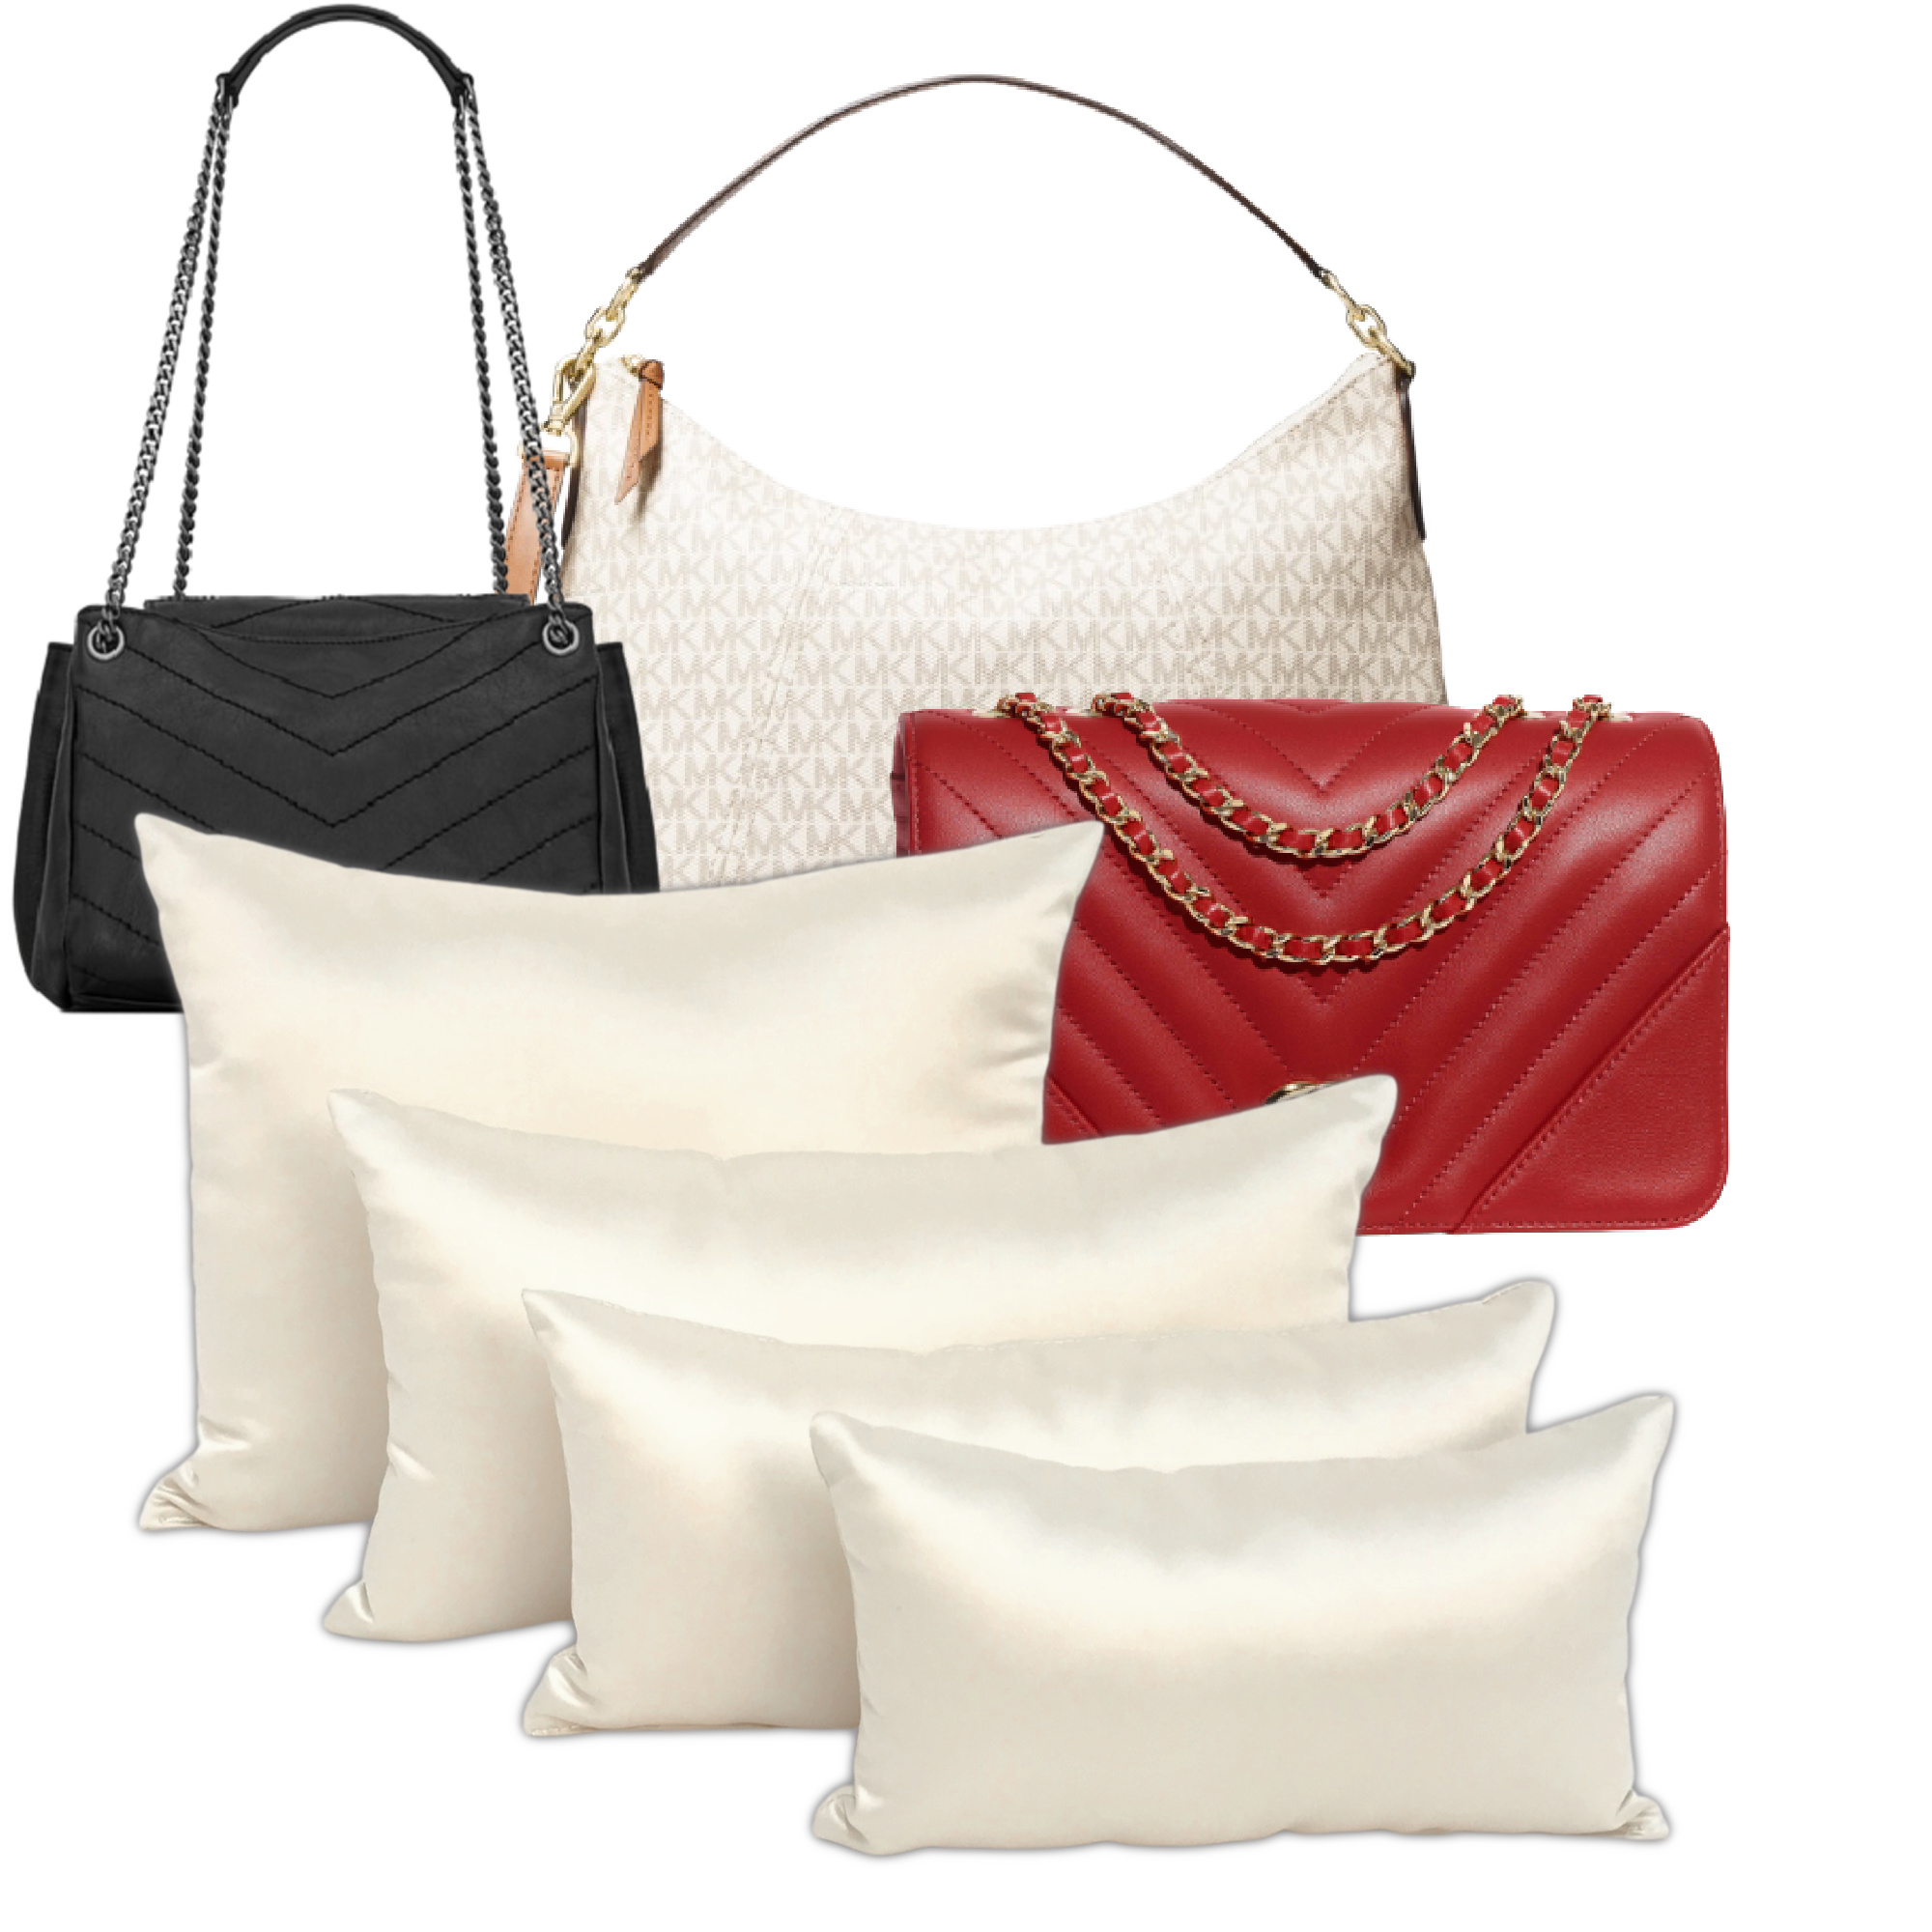 https://fabrinique.com/wp-content/uploads/2022/11/GALLERY-IVORY-4-Piece-staggered-w-purses-1.jpg